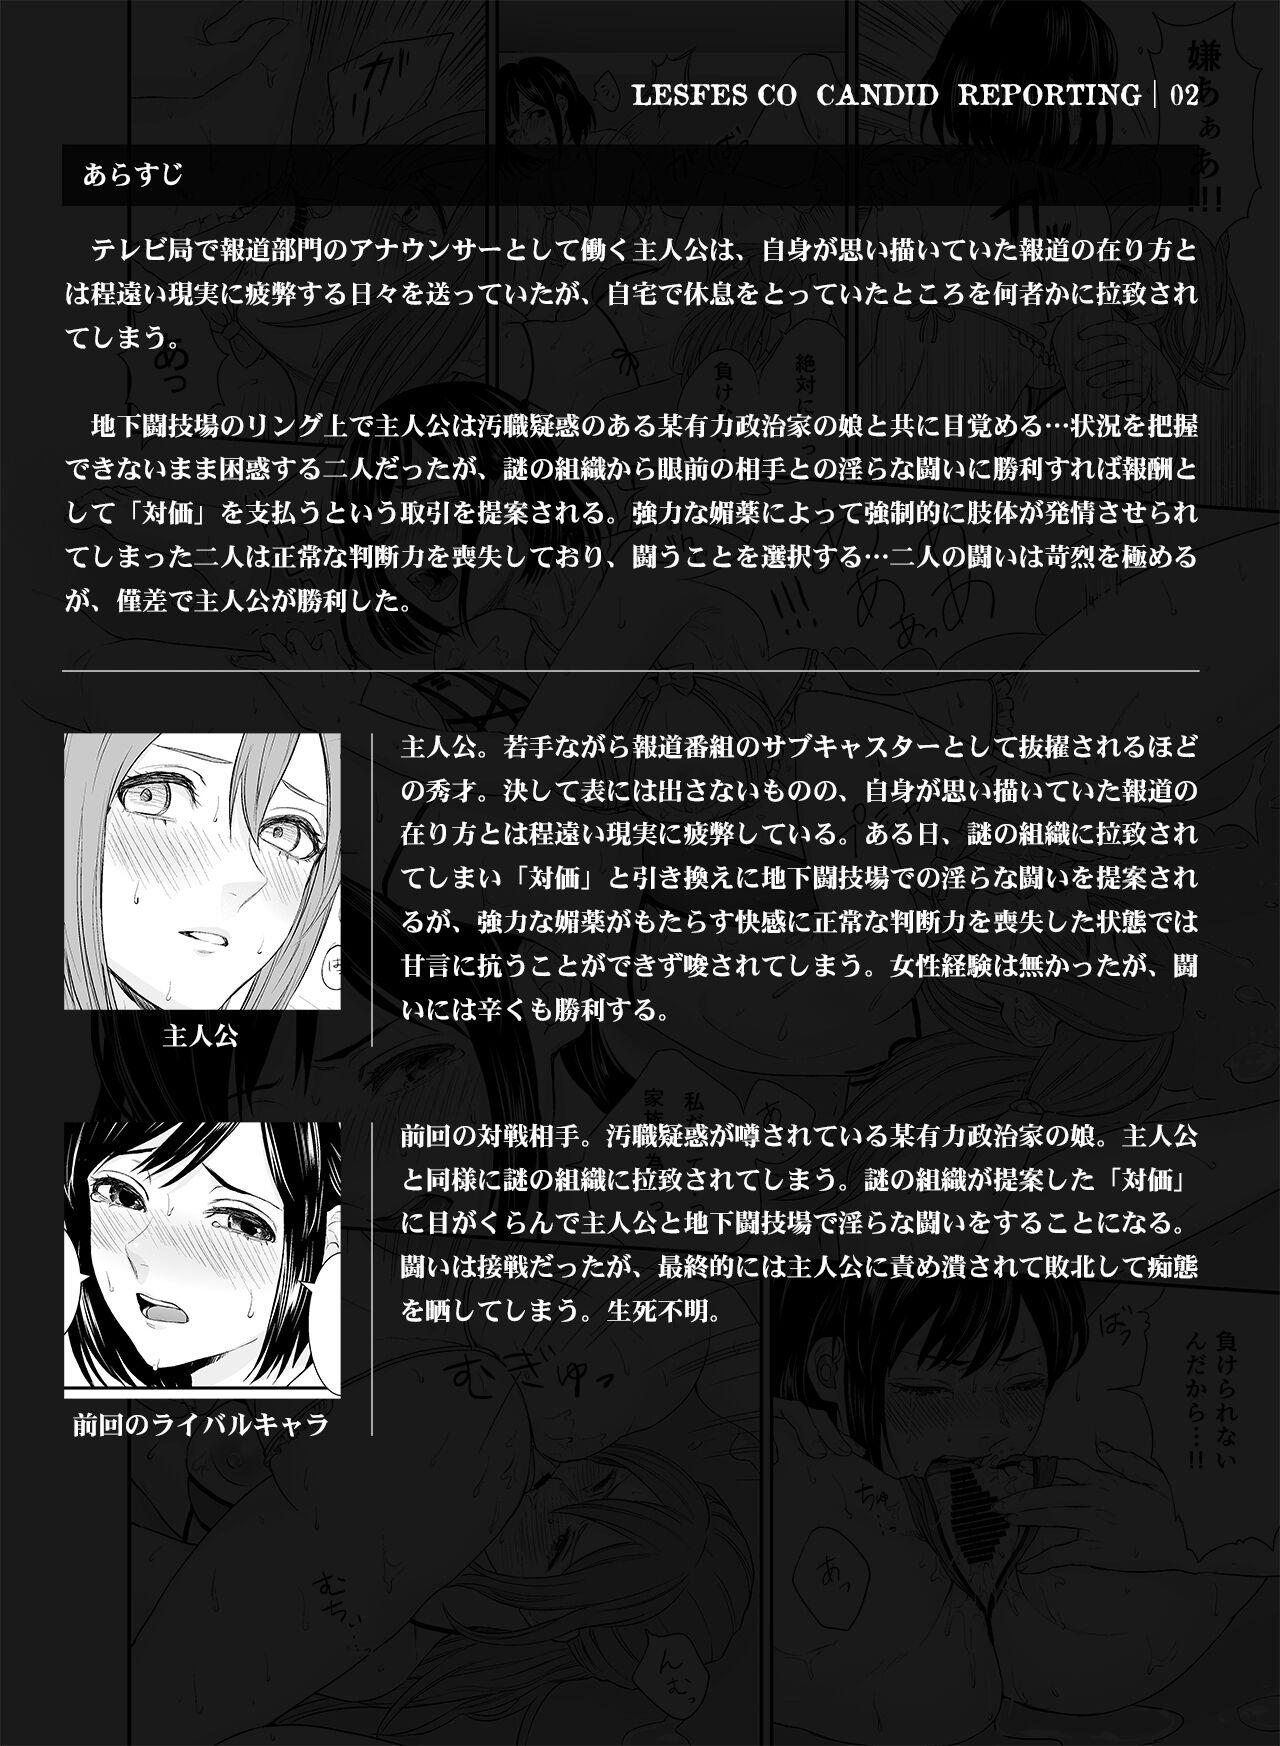 Shaking Lesfes Co Candid Reporting Vol.2 - Original  - Page 3